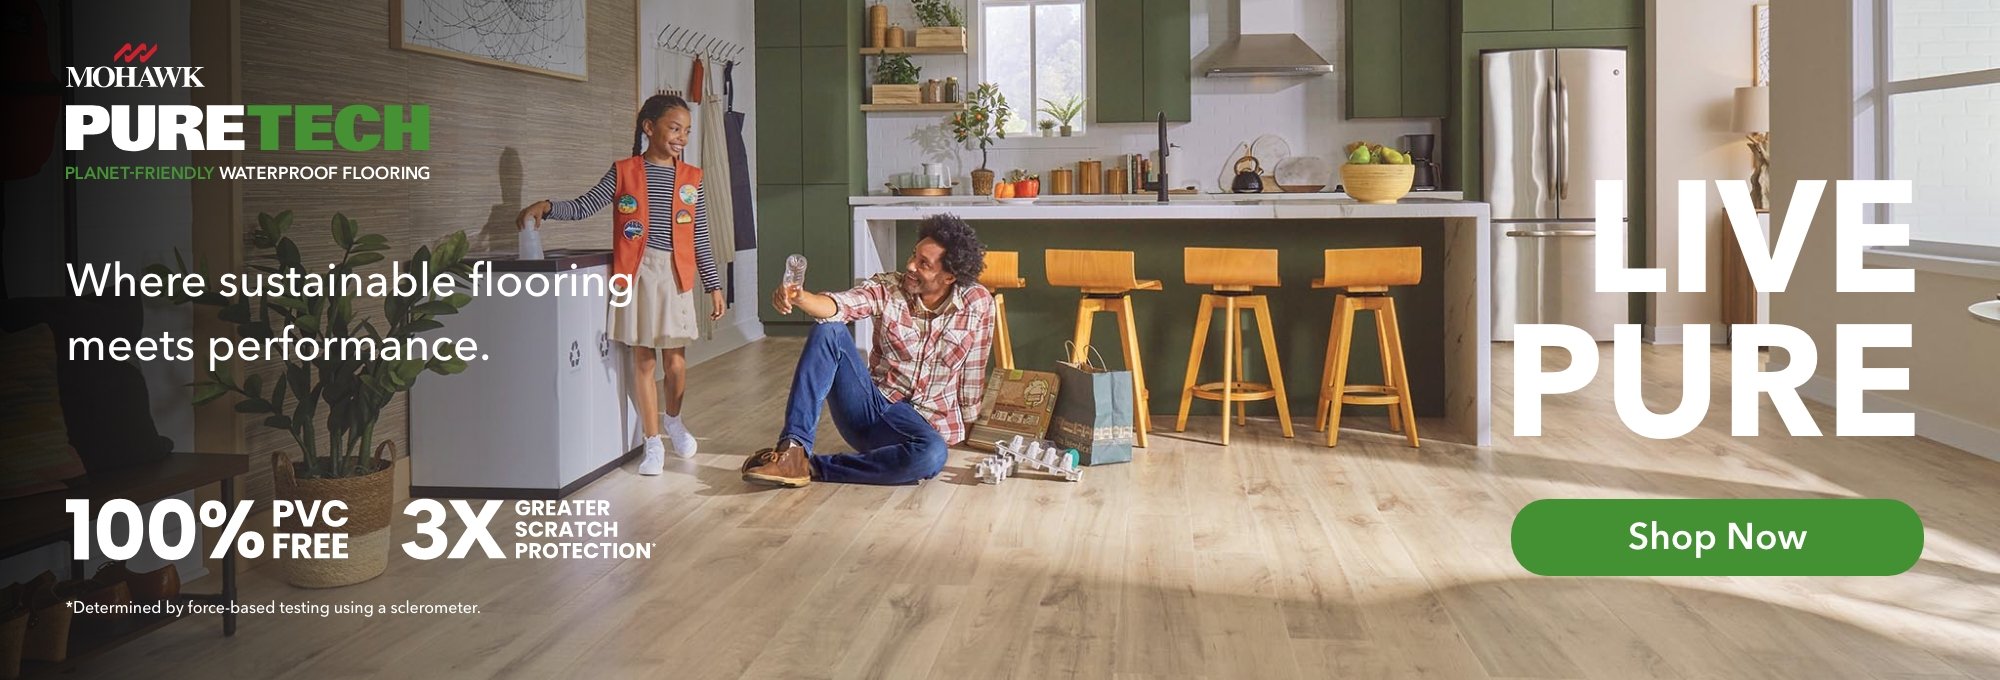 Durable and affordable floor solution featured with family playing on kitchen floor